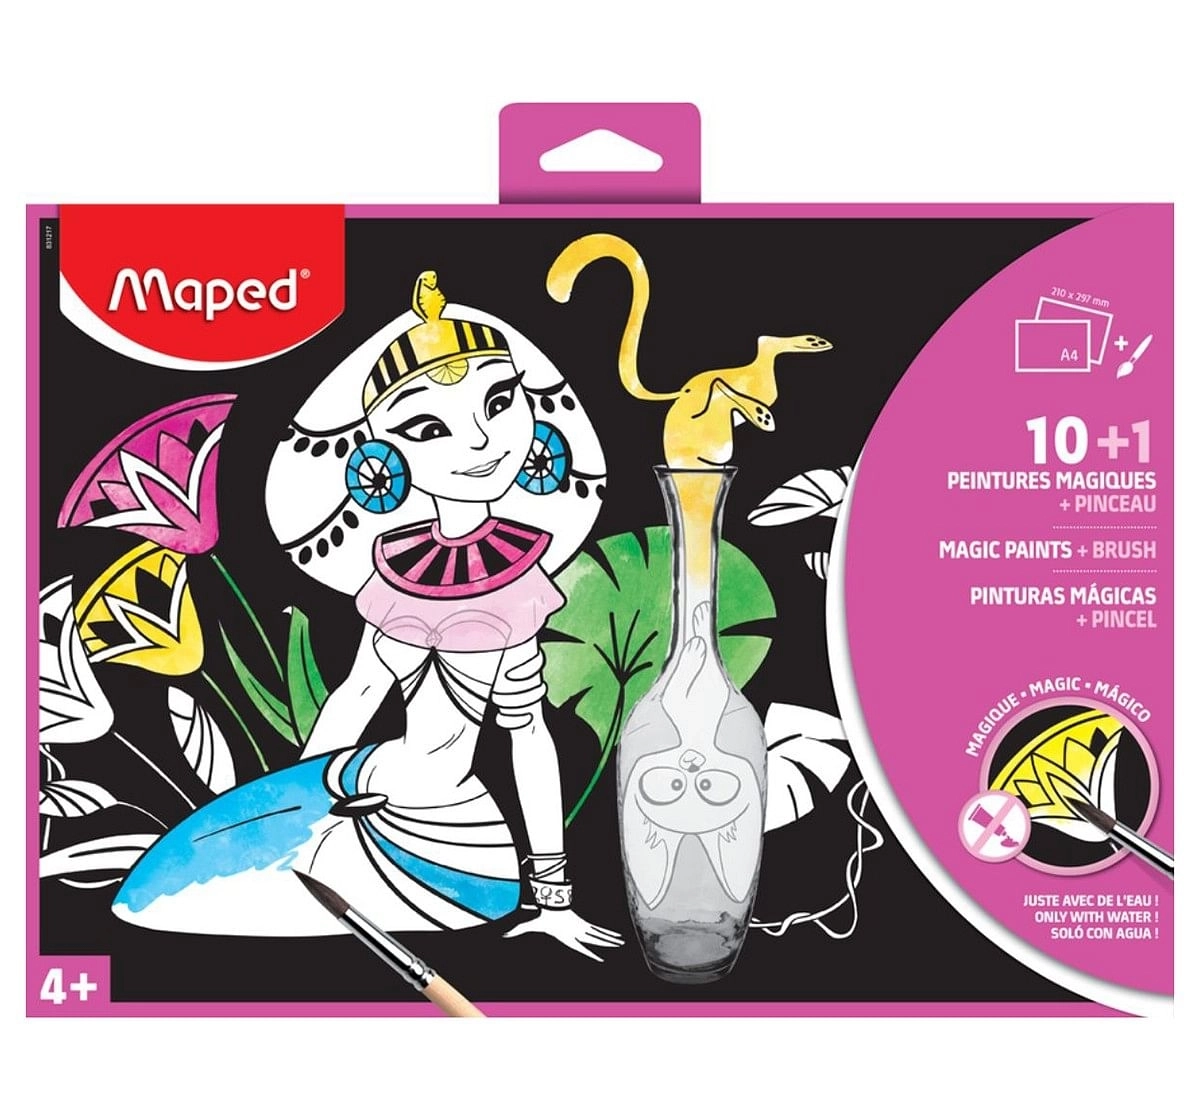 Maped Magic Paint 10 Sheets and 1 Brush, 7Y+ (Multicolour)